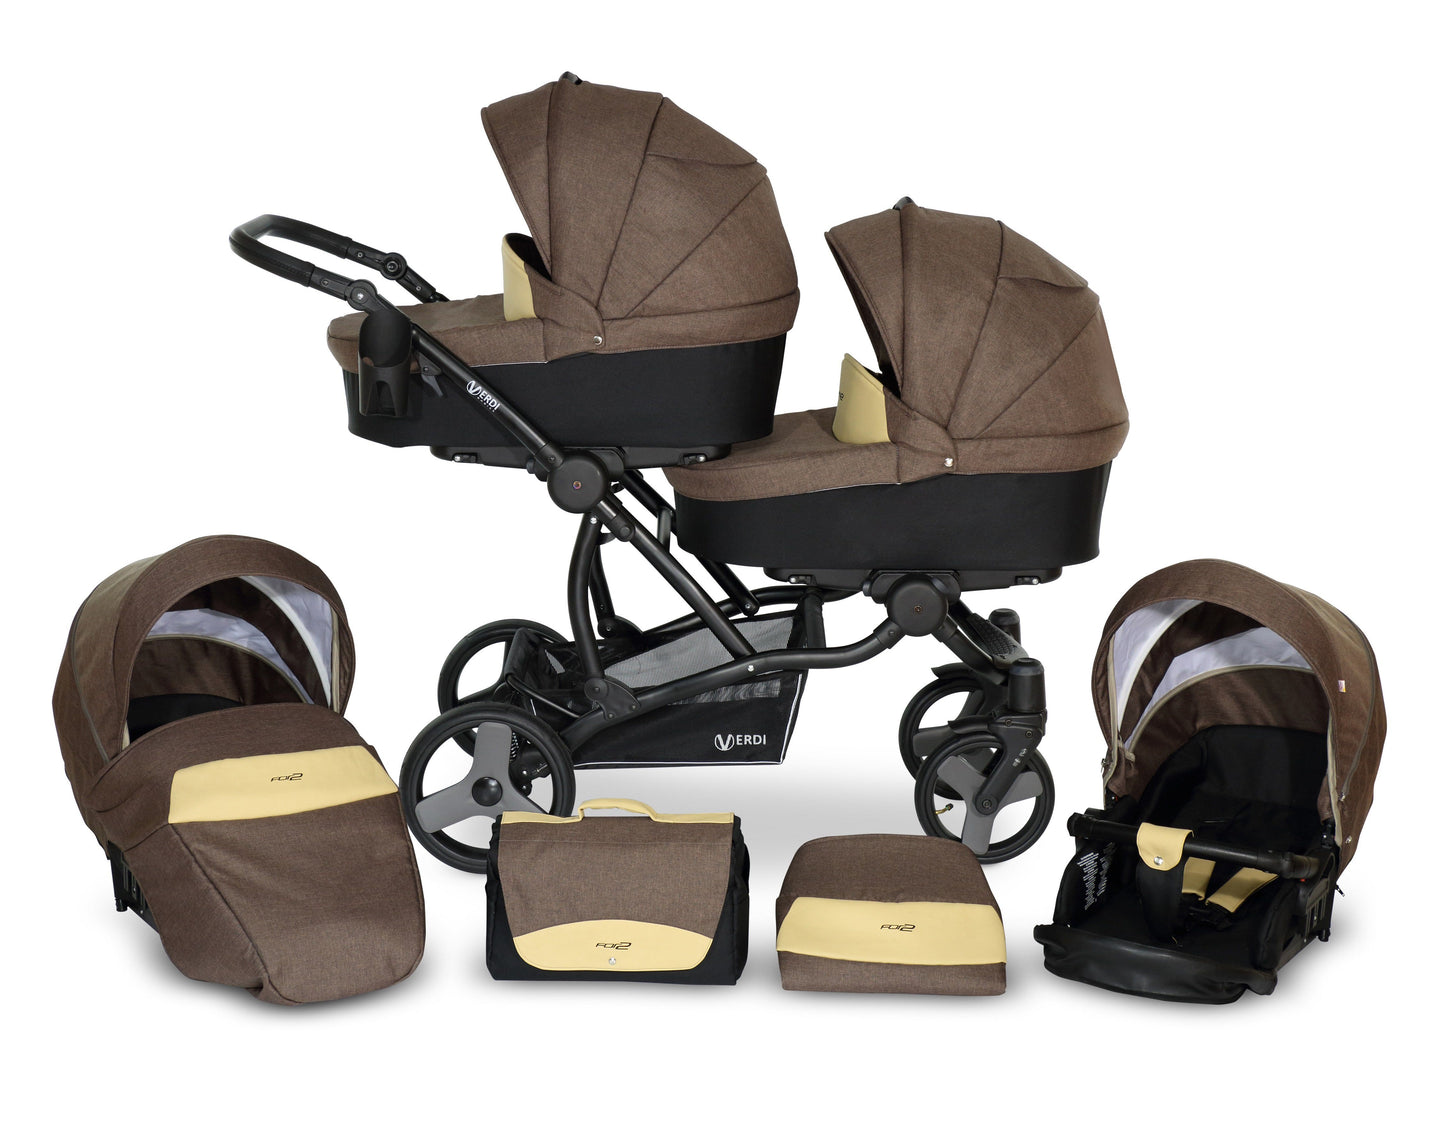 The For 2 Double buggy 3 in 1 | 2 in 1.